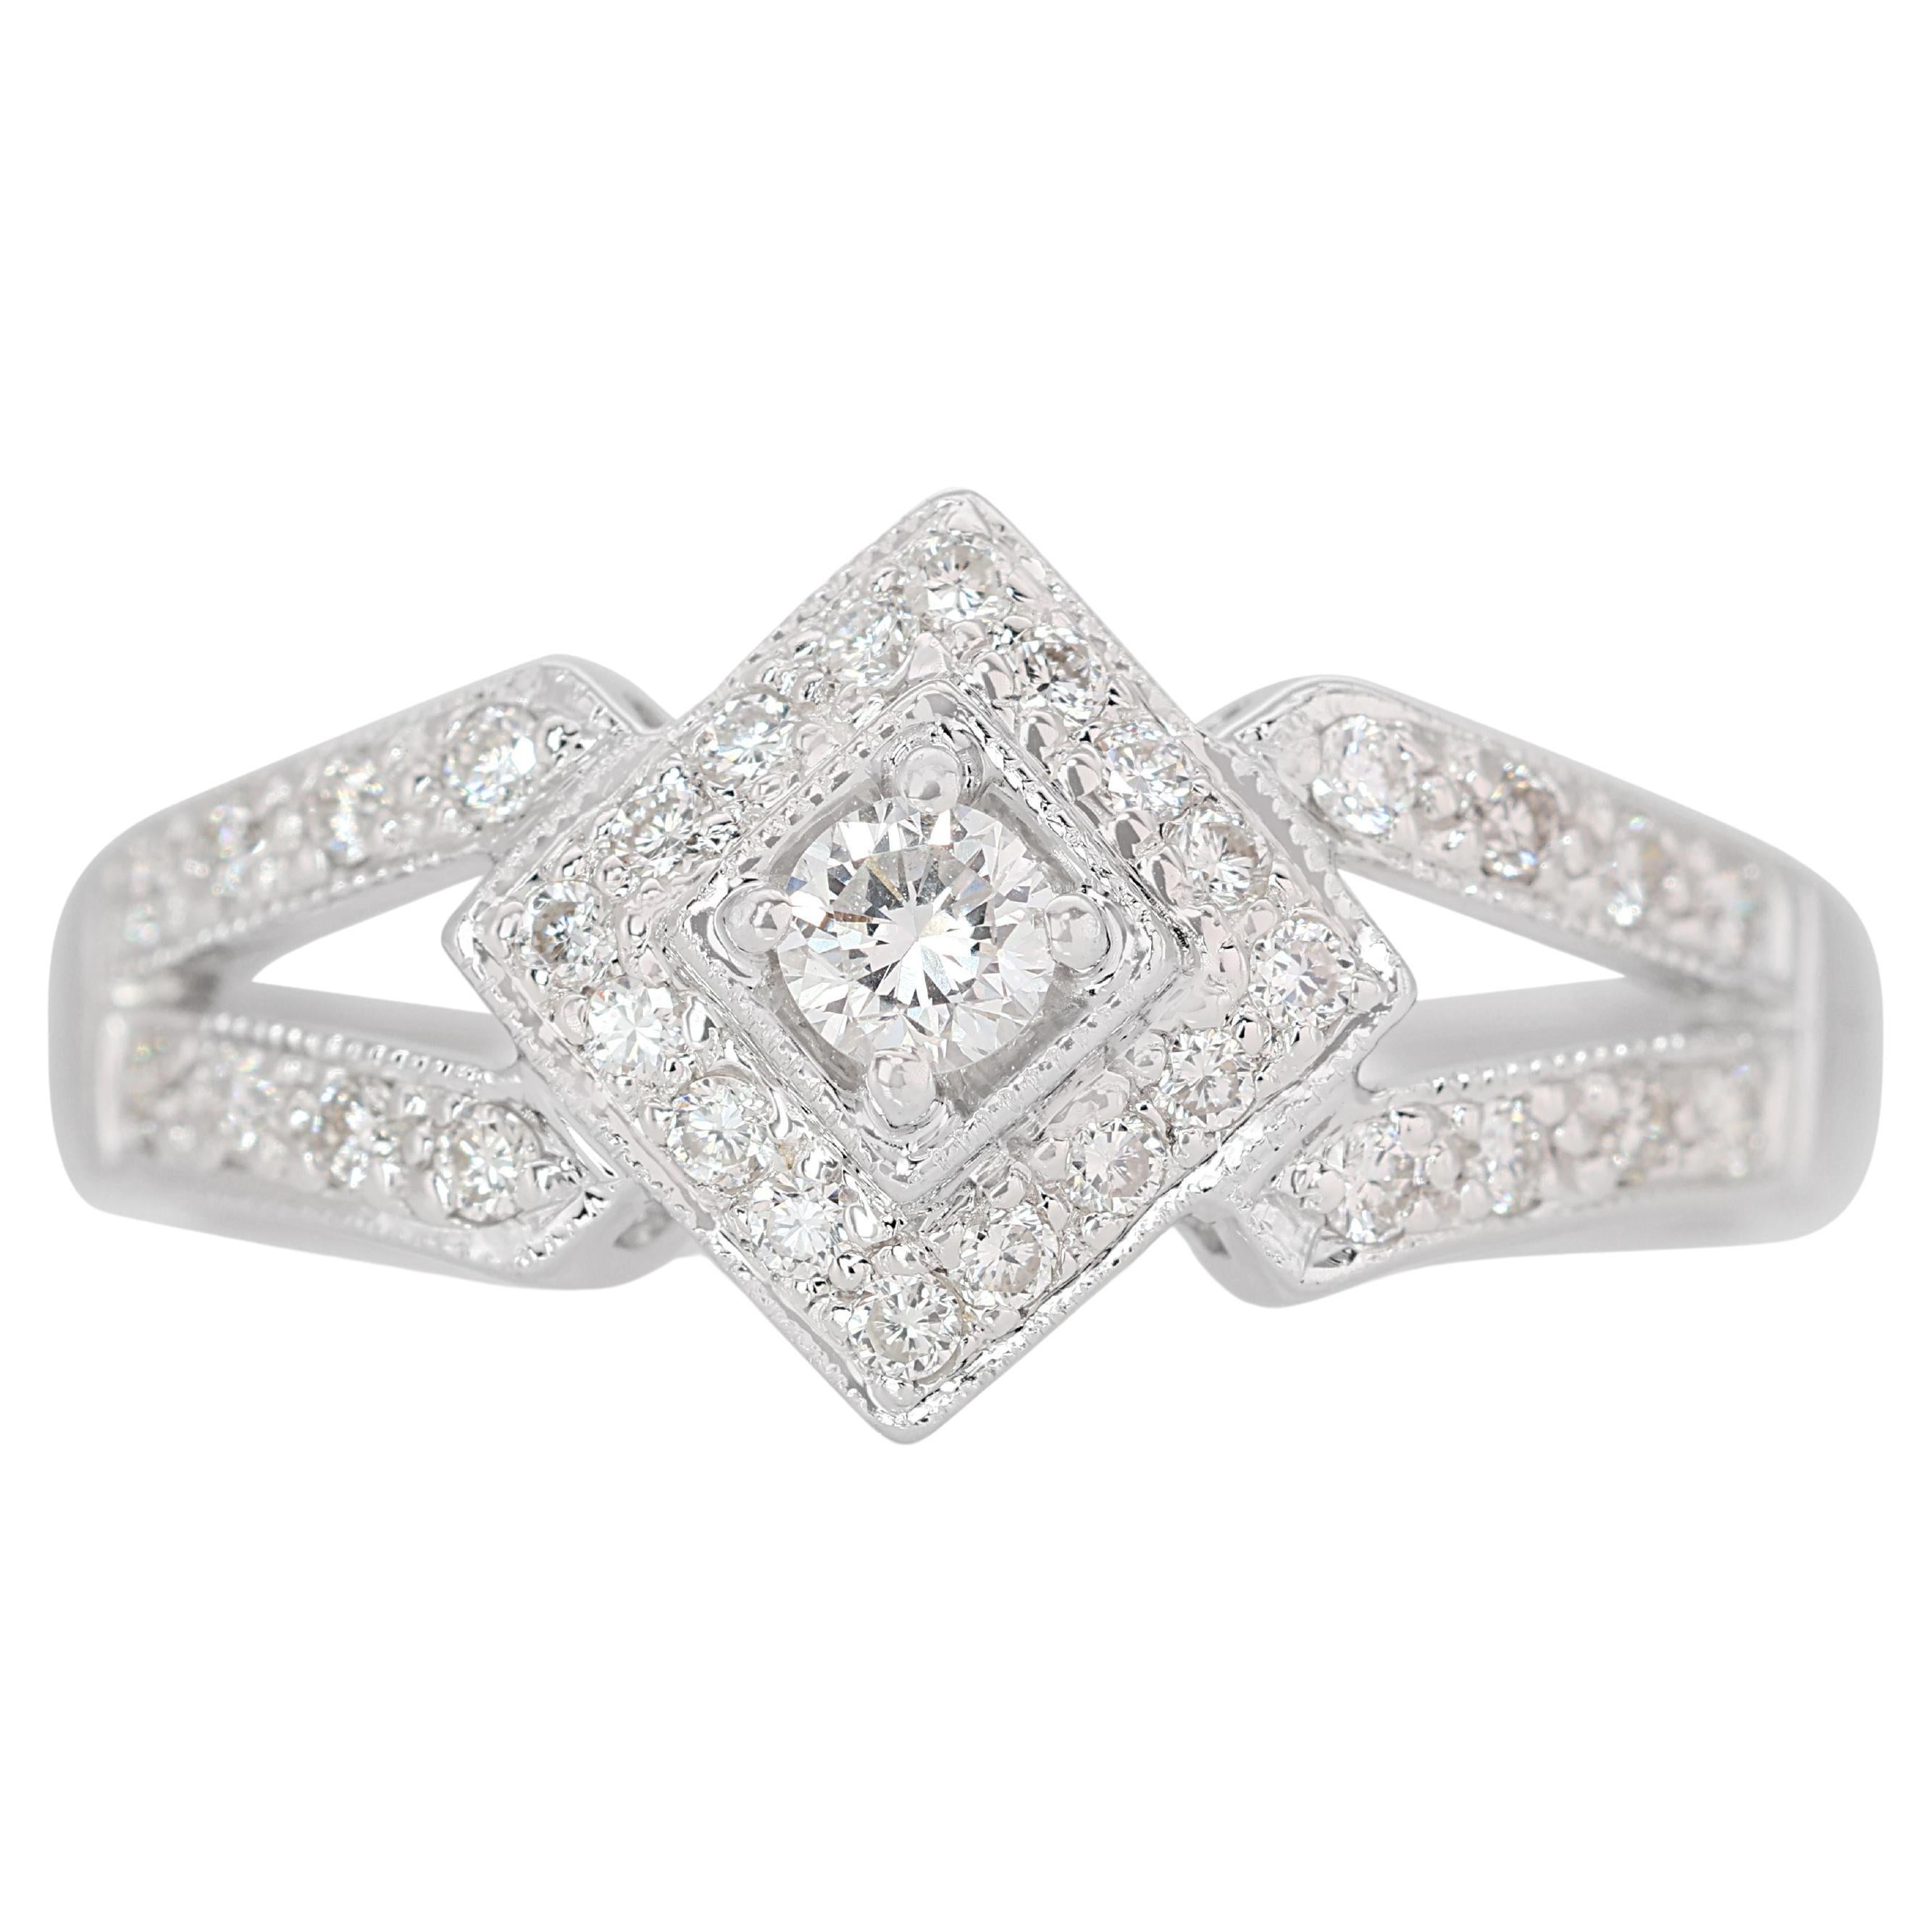 Dazzling 18k White Gold Pave Halo Ring with 0.29ct Natural Diamonds